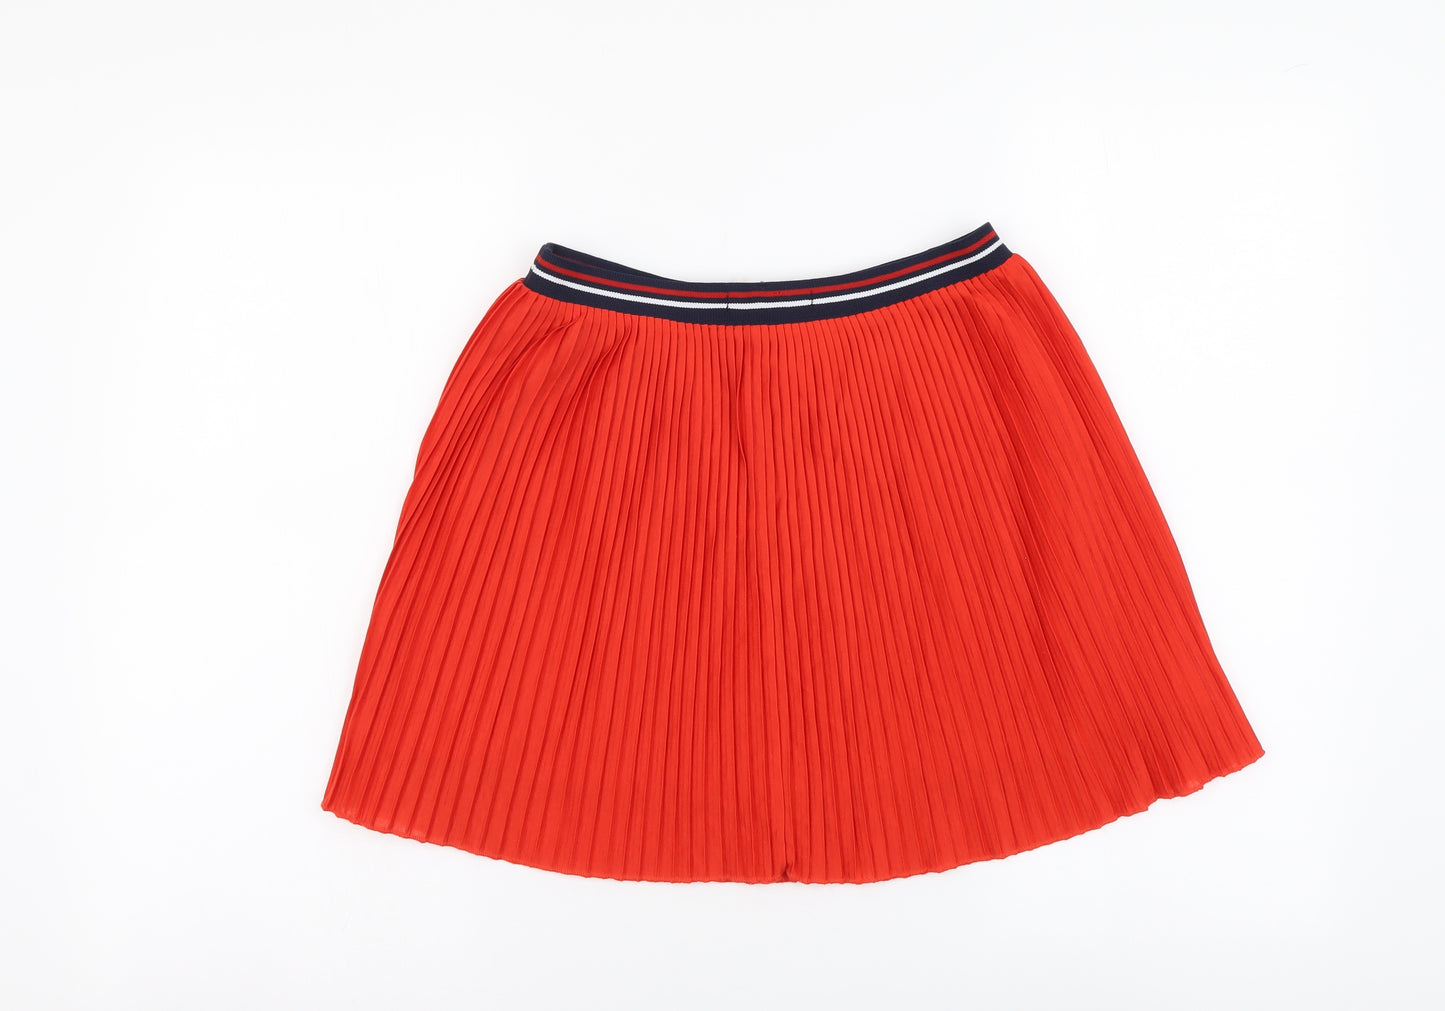 Marks and Spencer Girls Red Polyester Pleated Skirt Size 11-12 Years Regular Drawstring